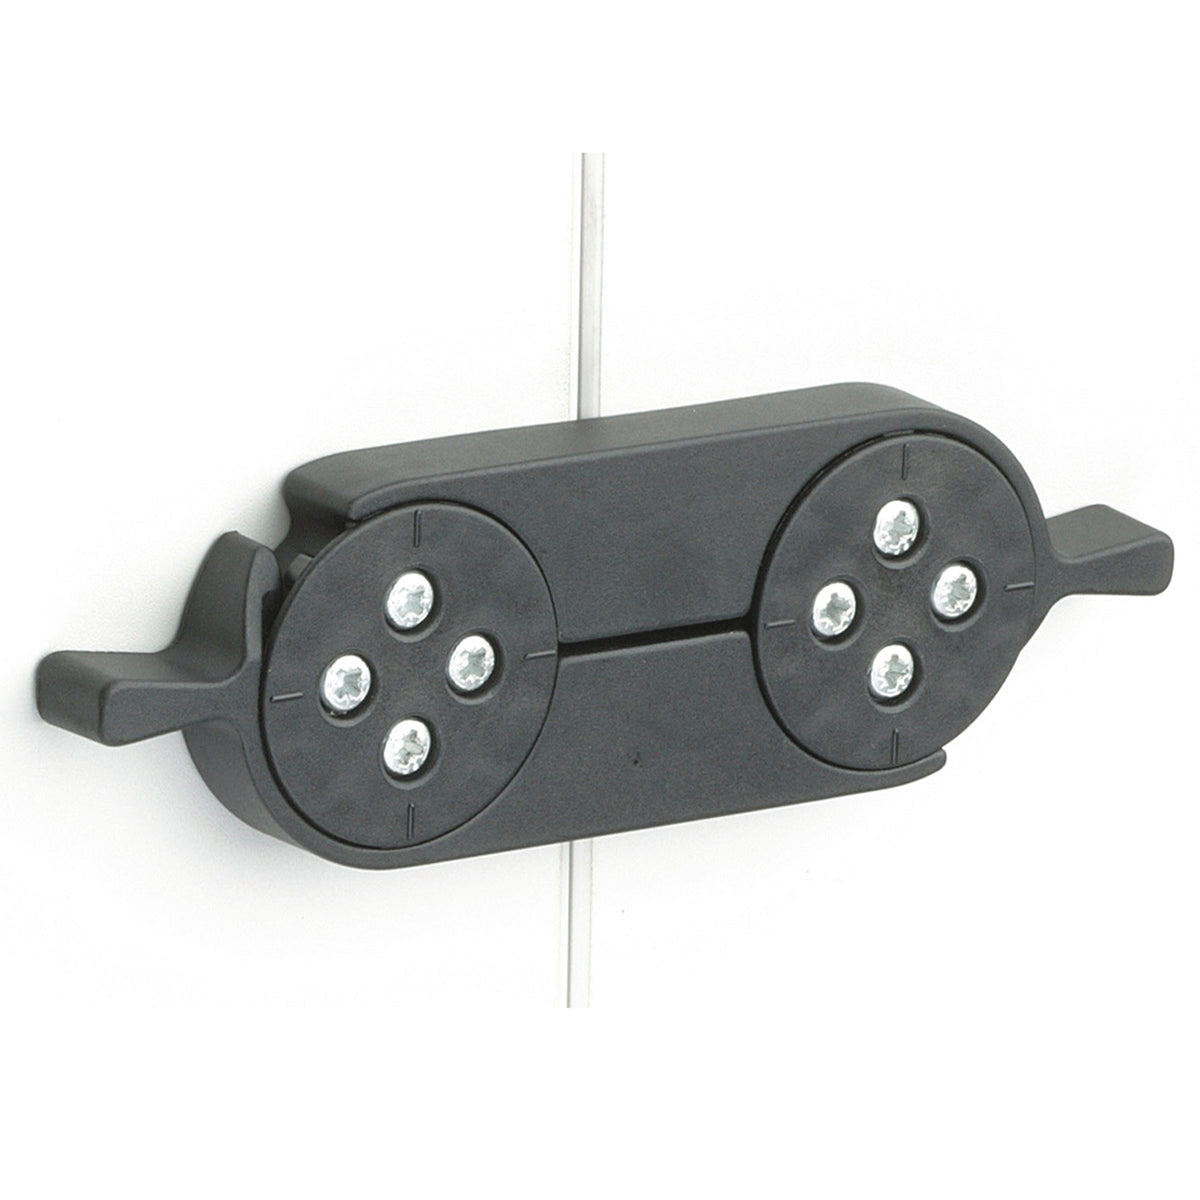 Marco Table Connector